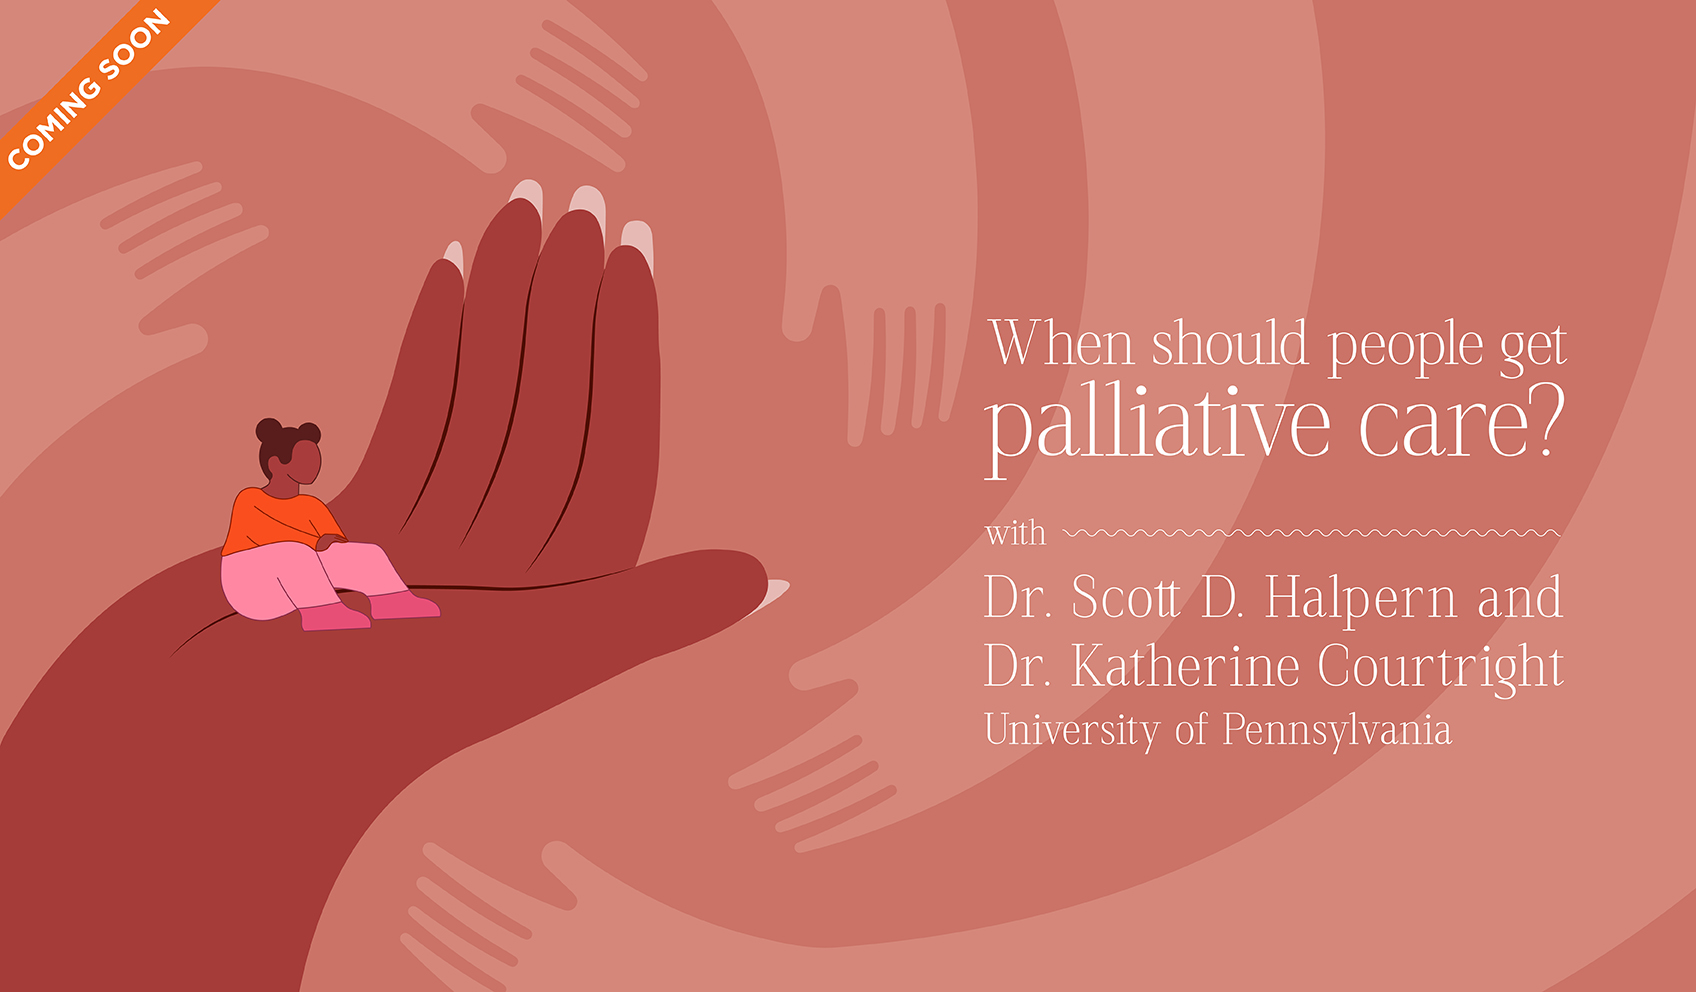 When should people get palliative care?